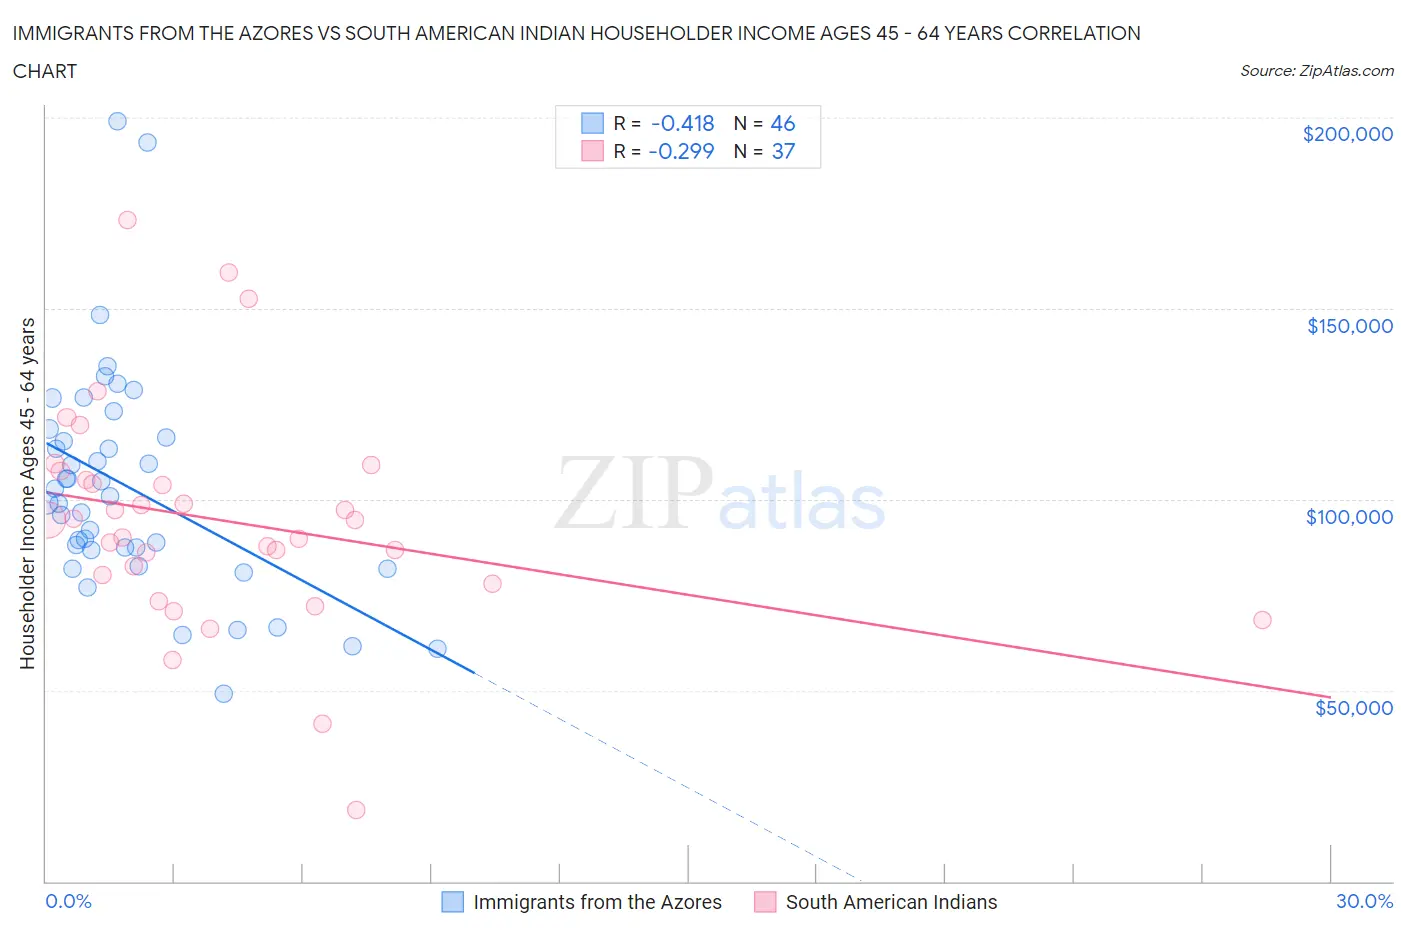 Immigrants from the Azores vs South American Indian Householder Income Ages 45 - 64 years